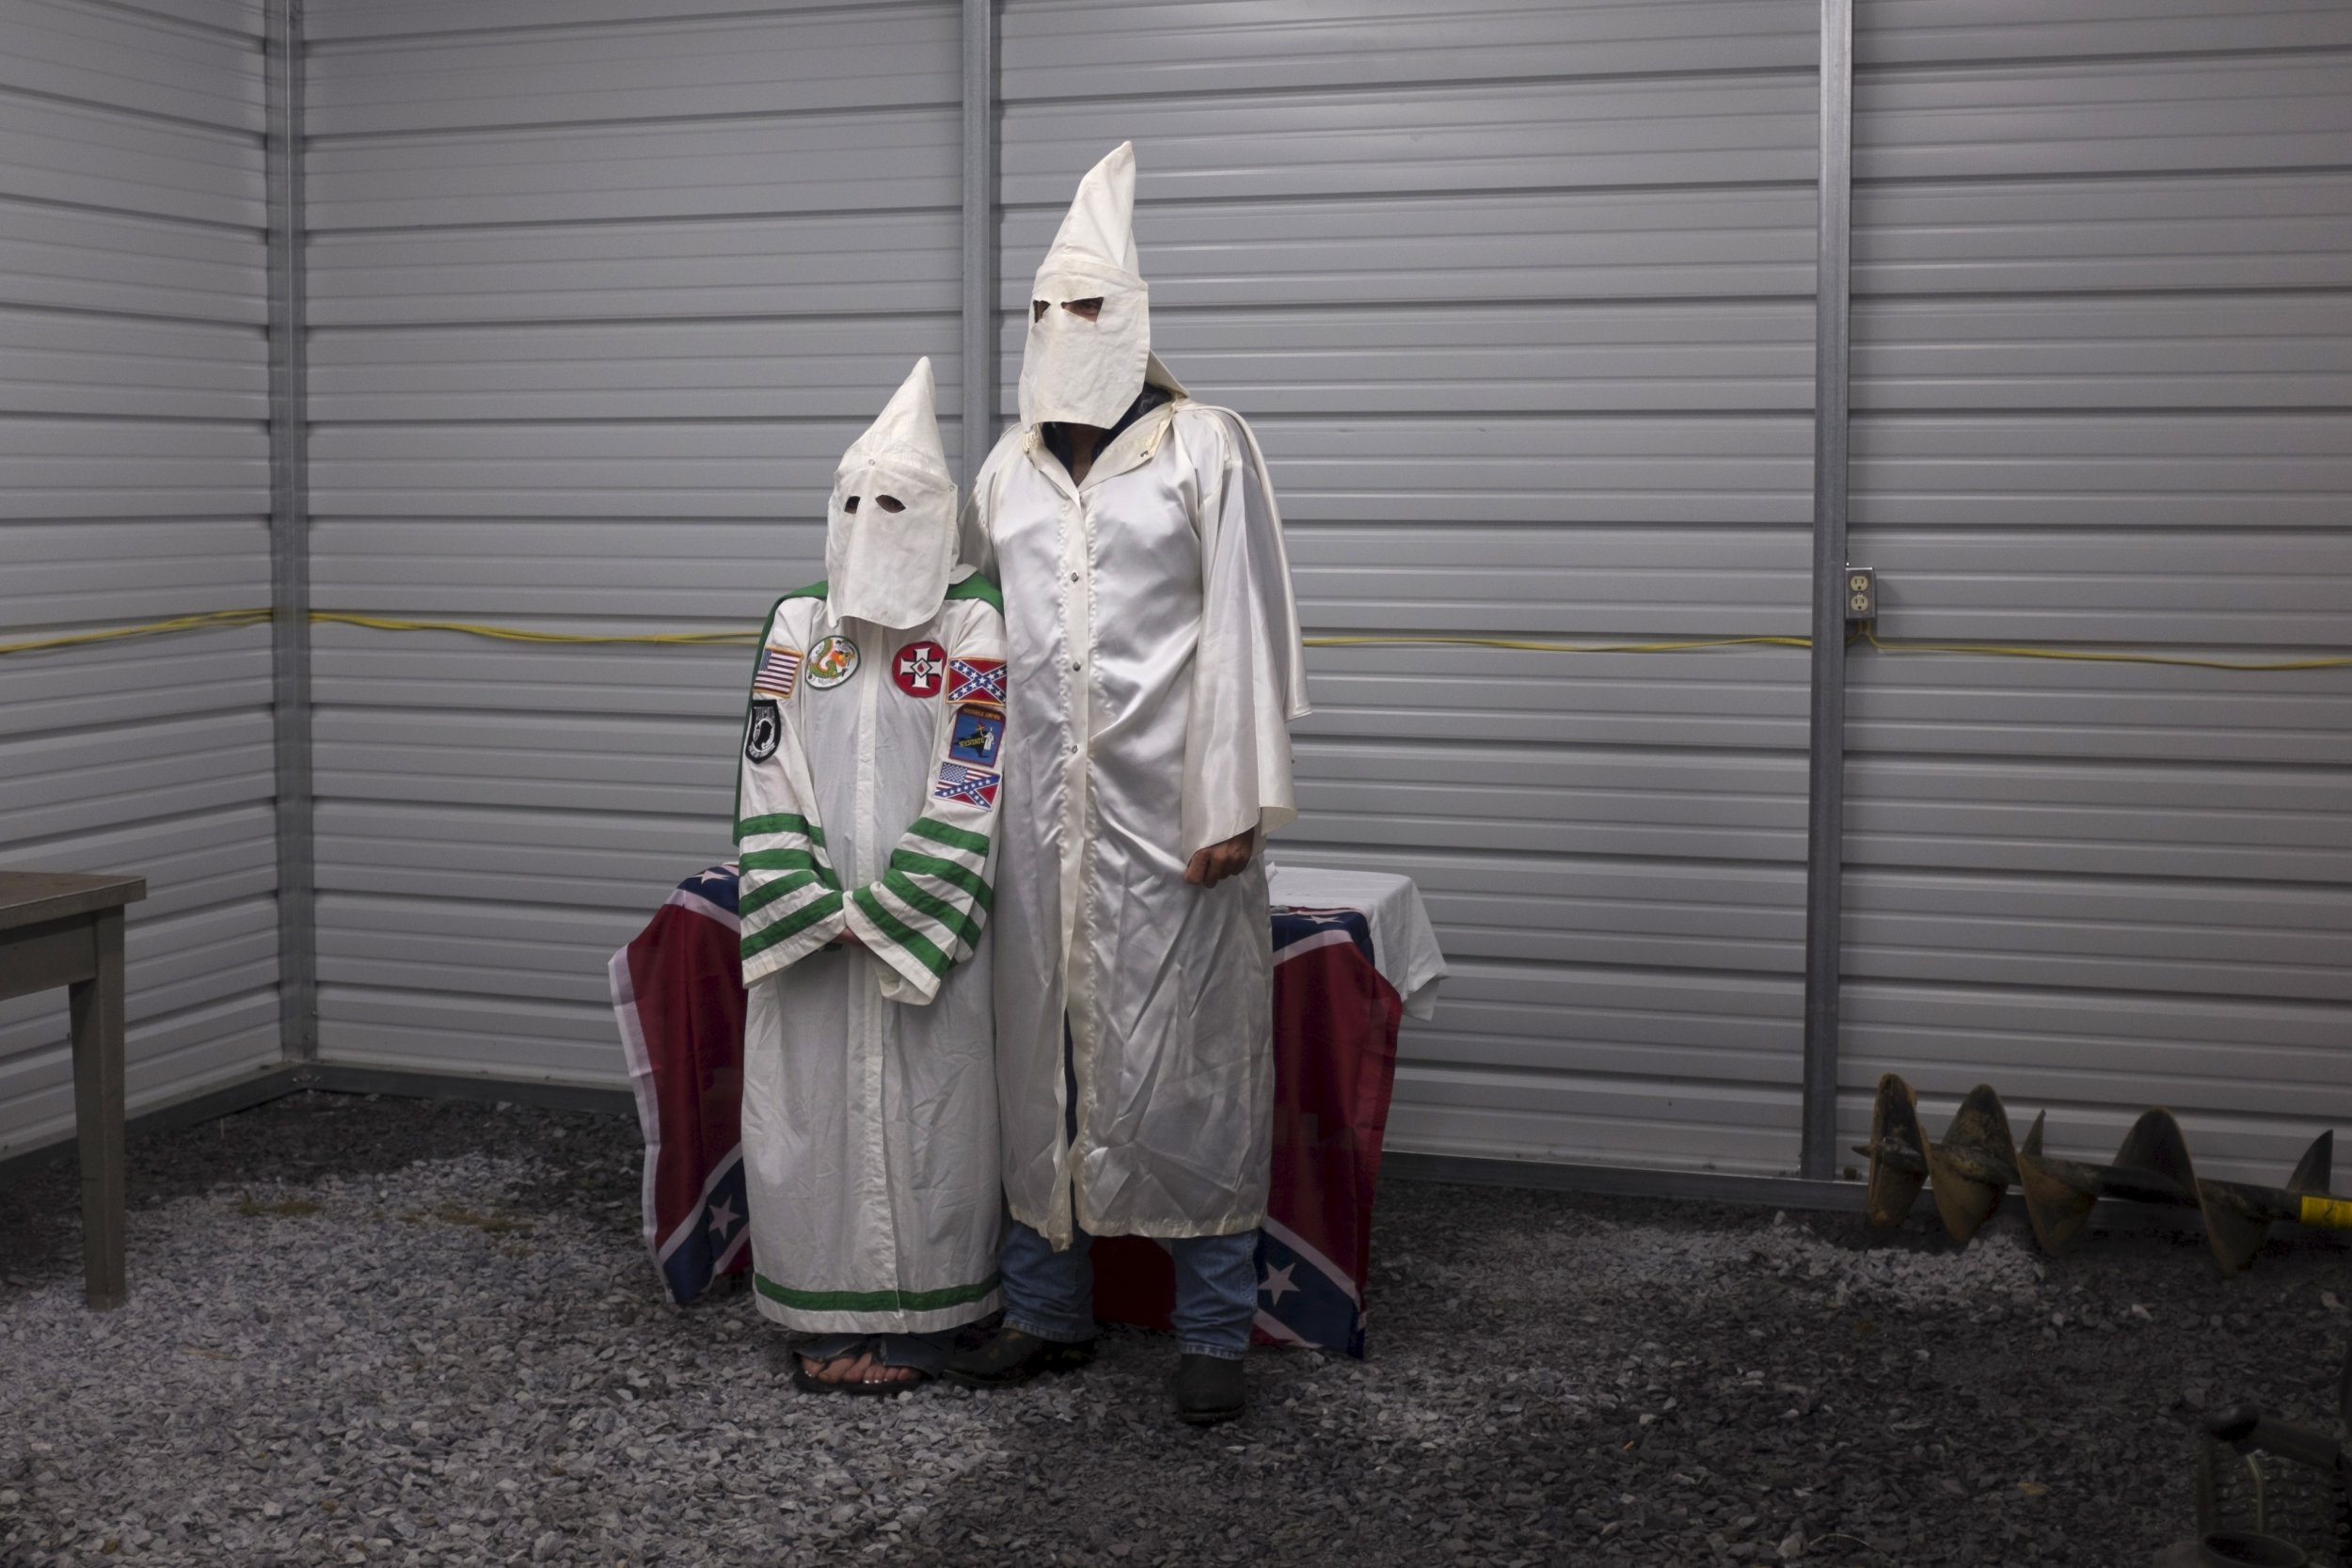 School Ku Klux Klan Costume Controversy Cancels Play